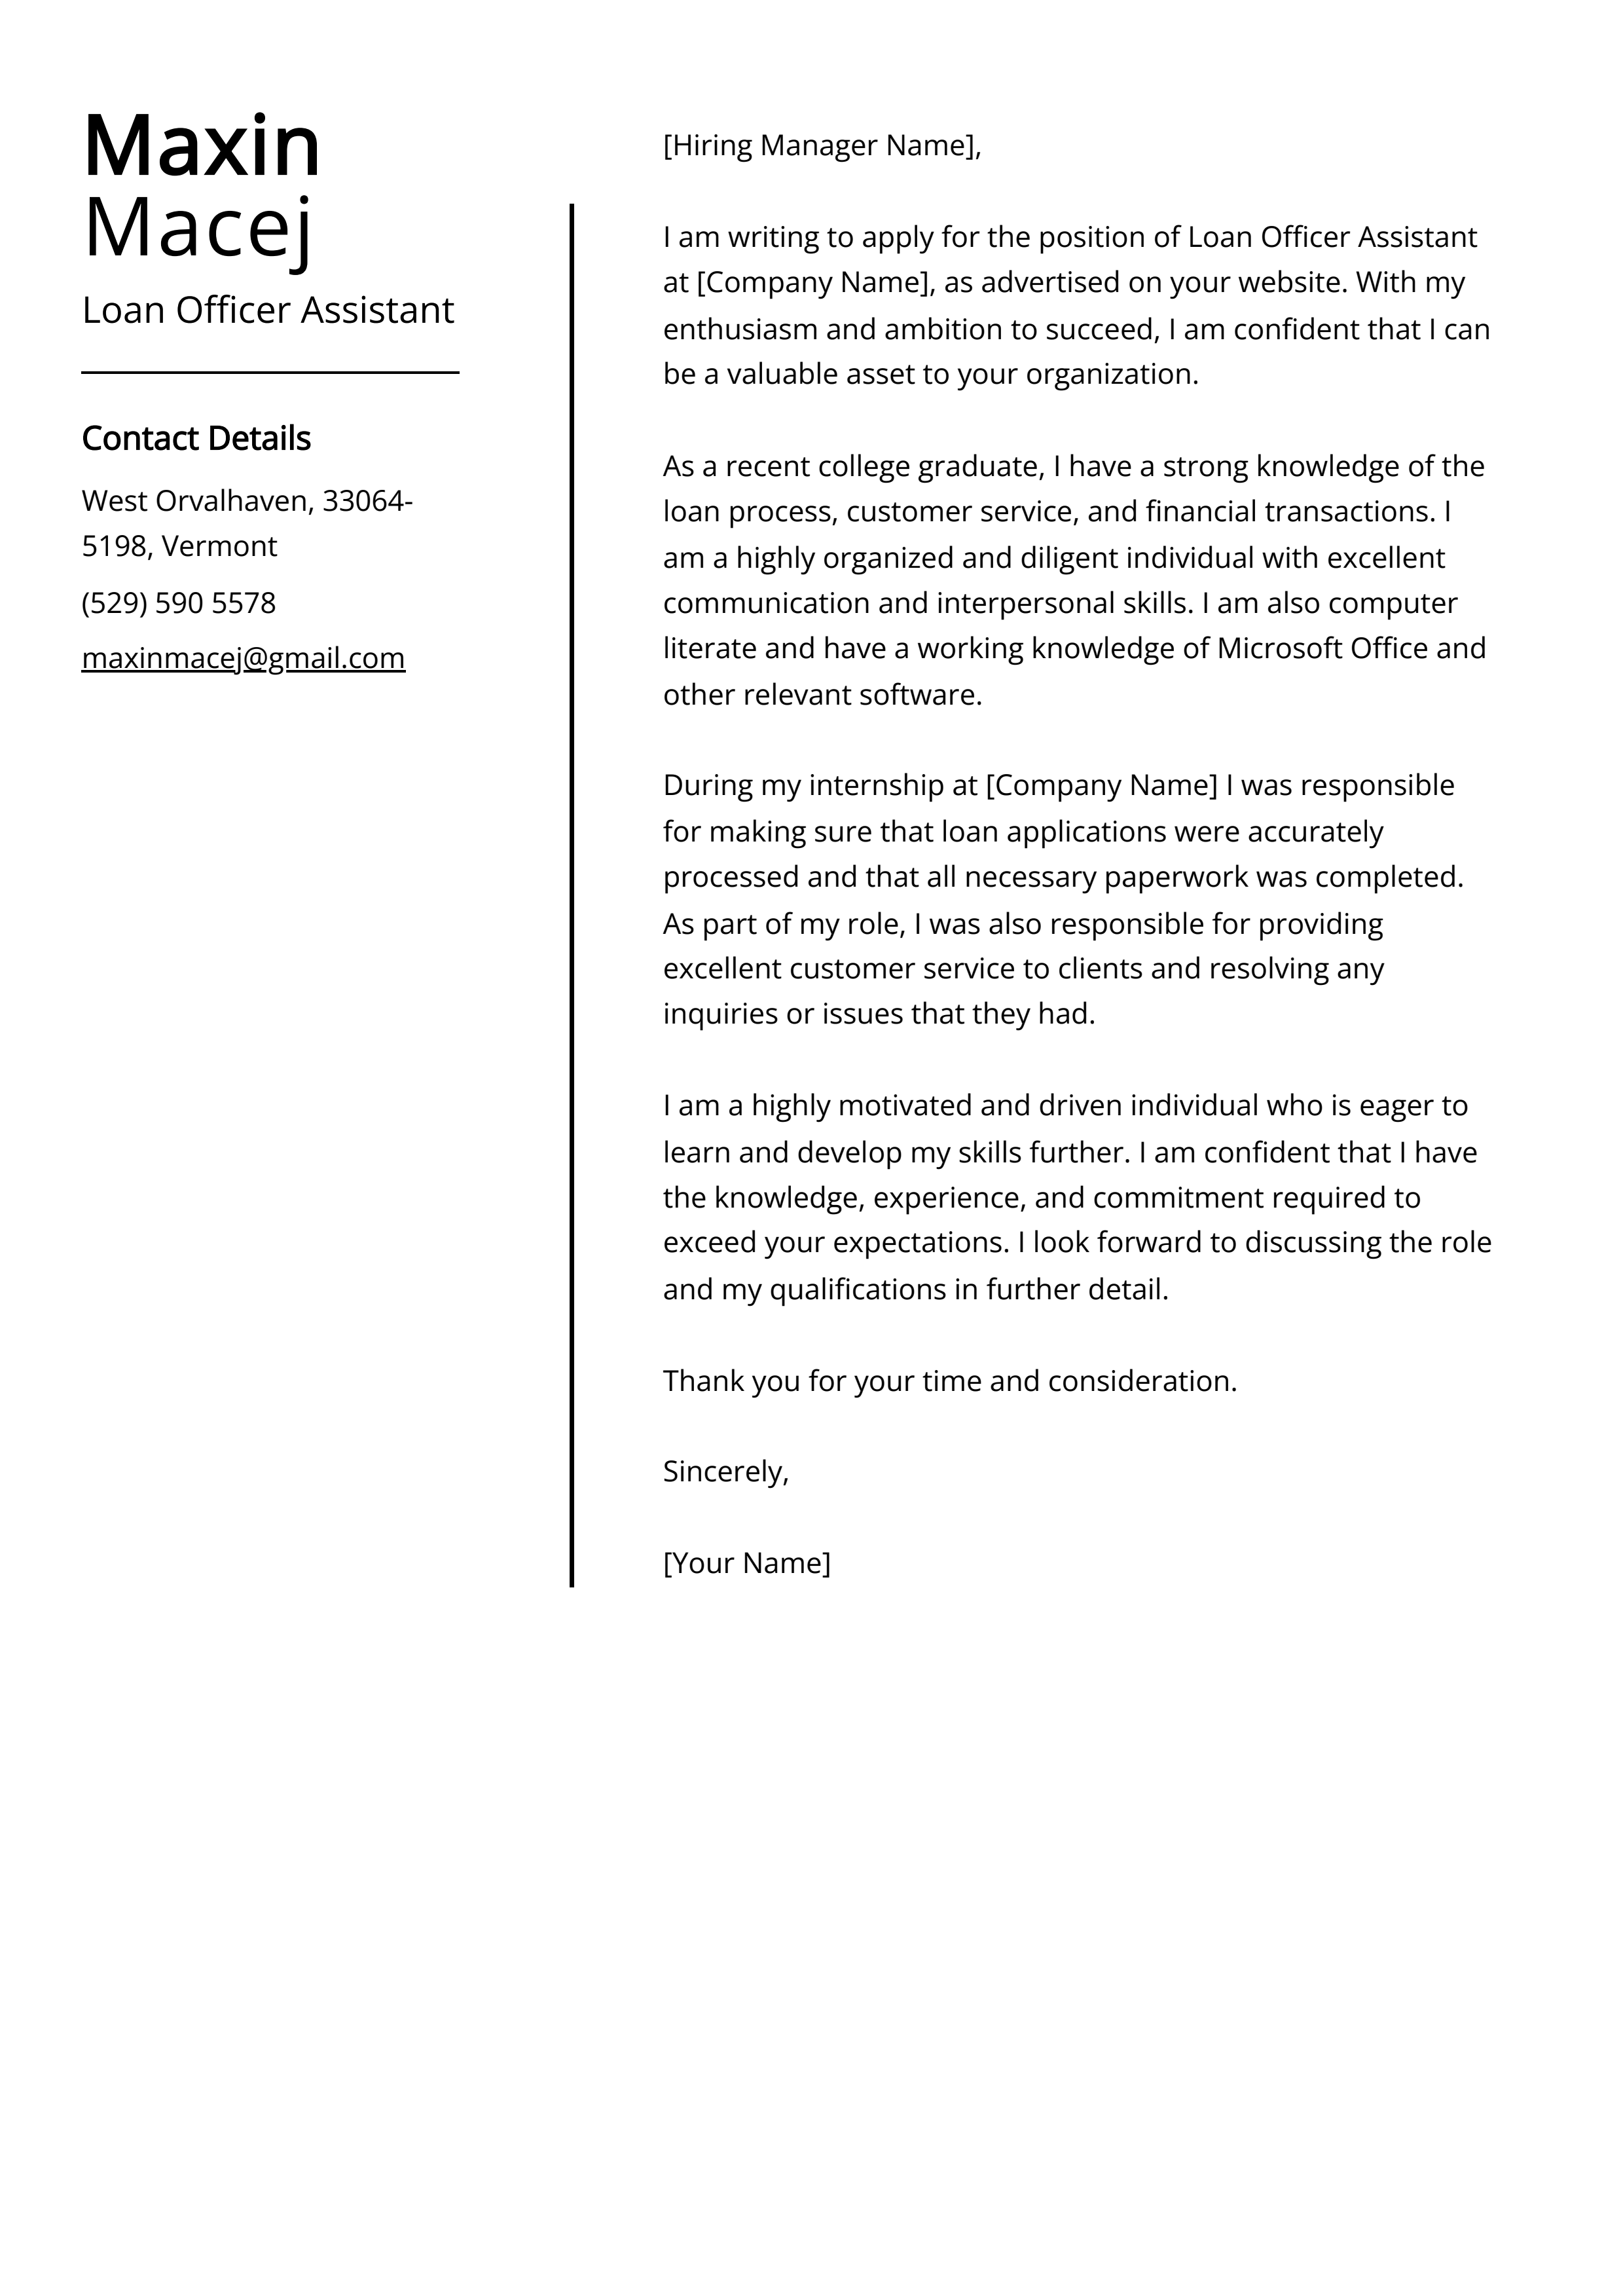 Loan Officer Assistant Cover Letter Example